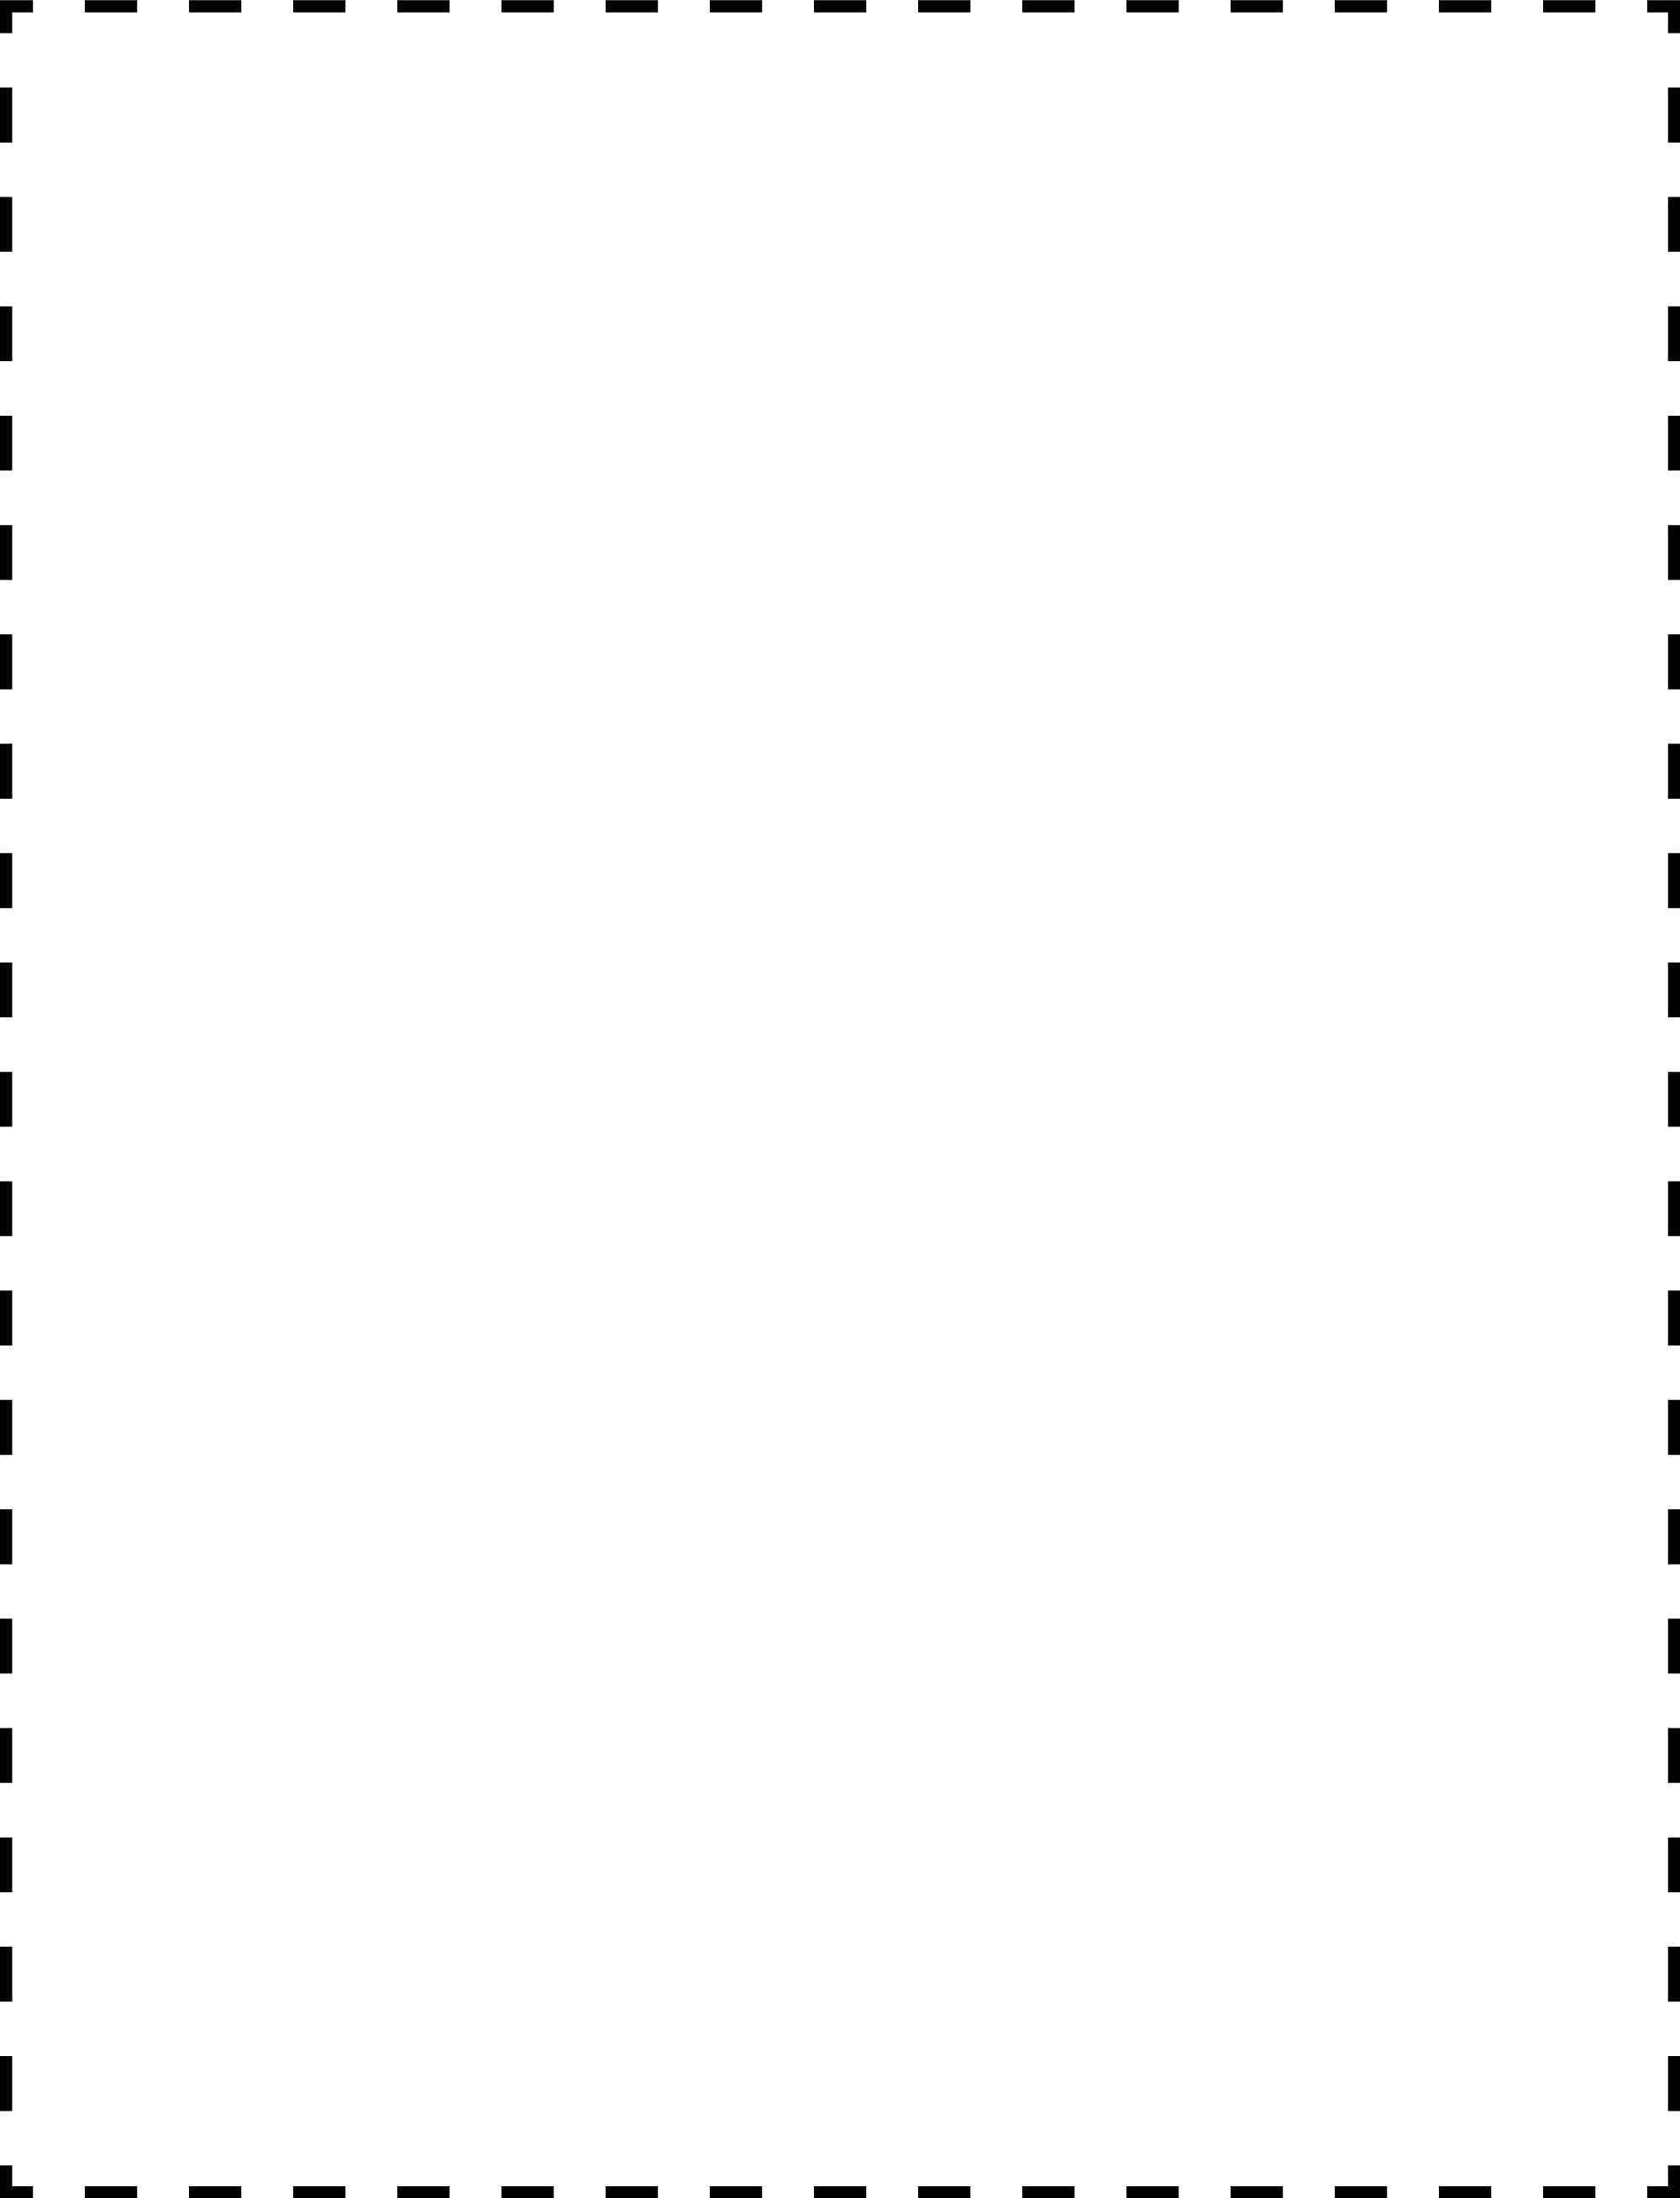 2093-coupon-outline-4x5-k.png